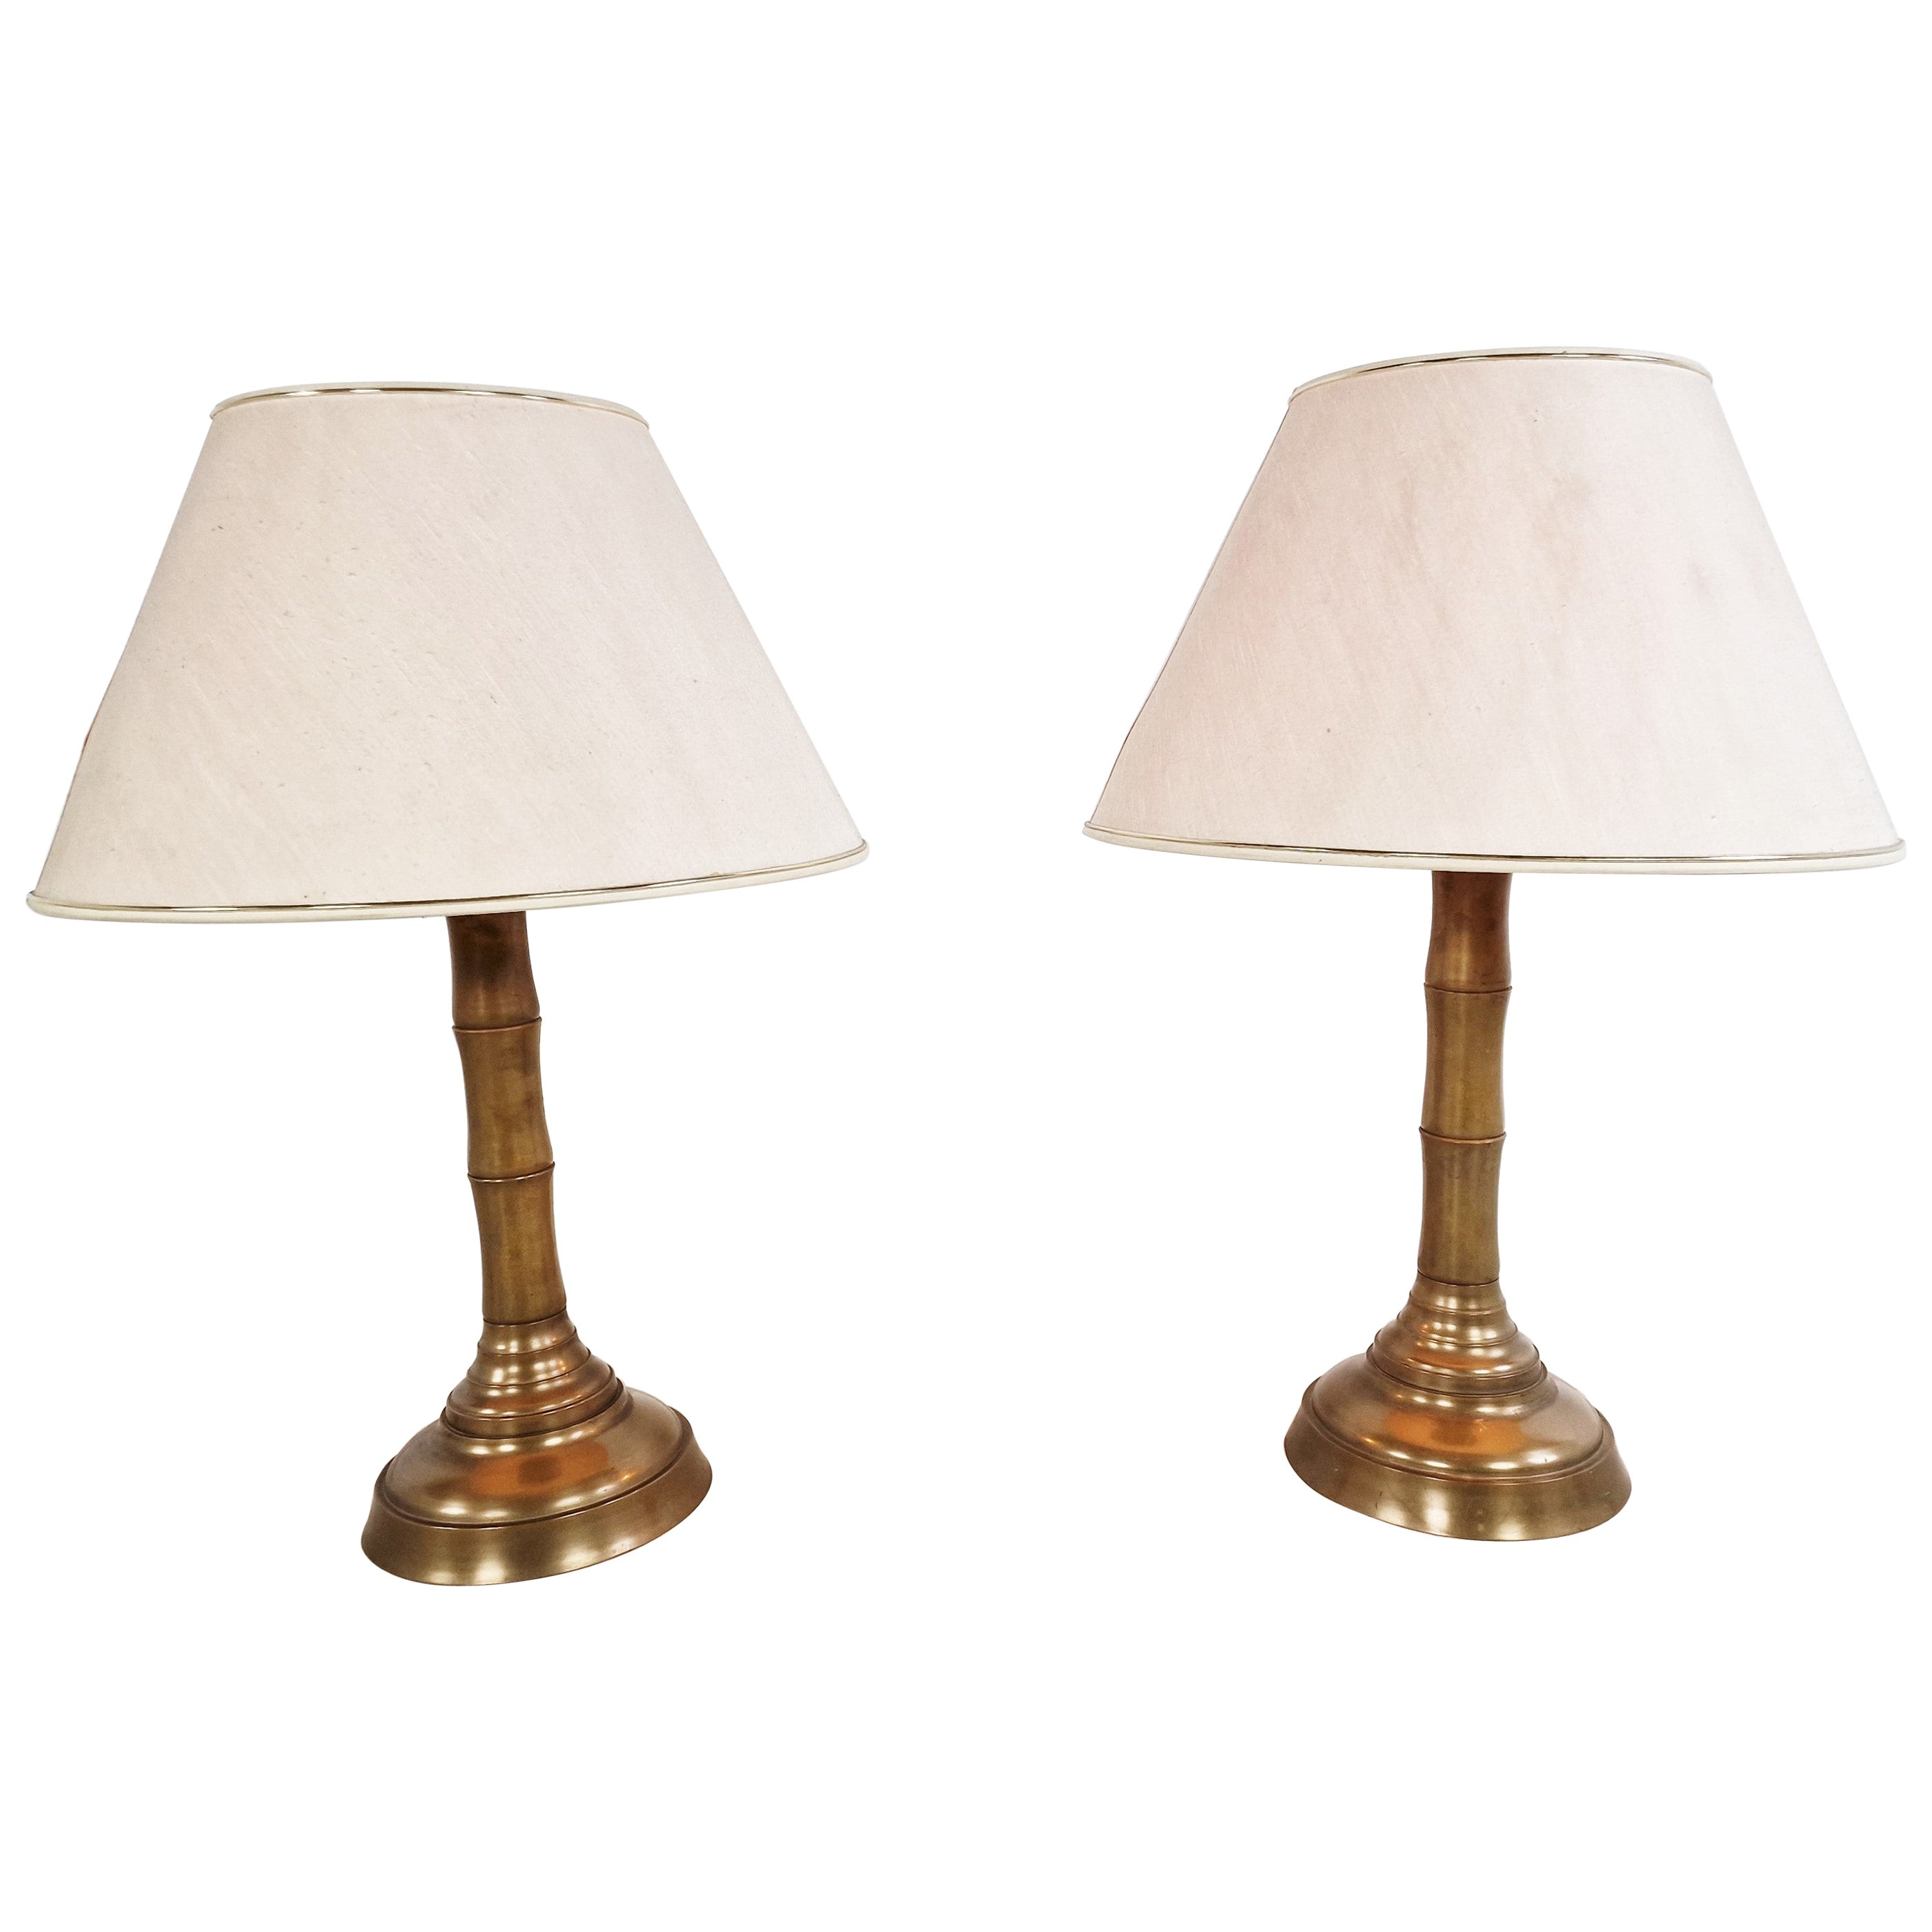 Pair of brass faux bamboo table lamps, 1970s